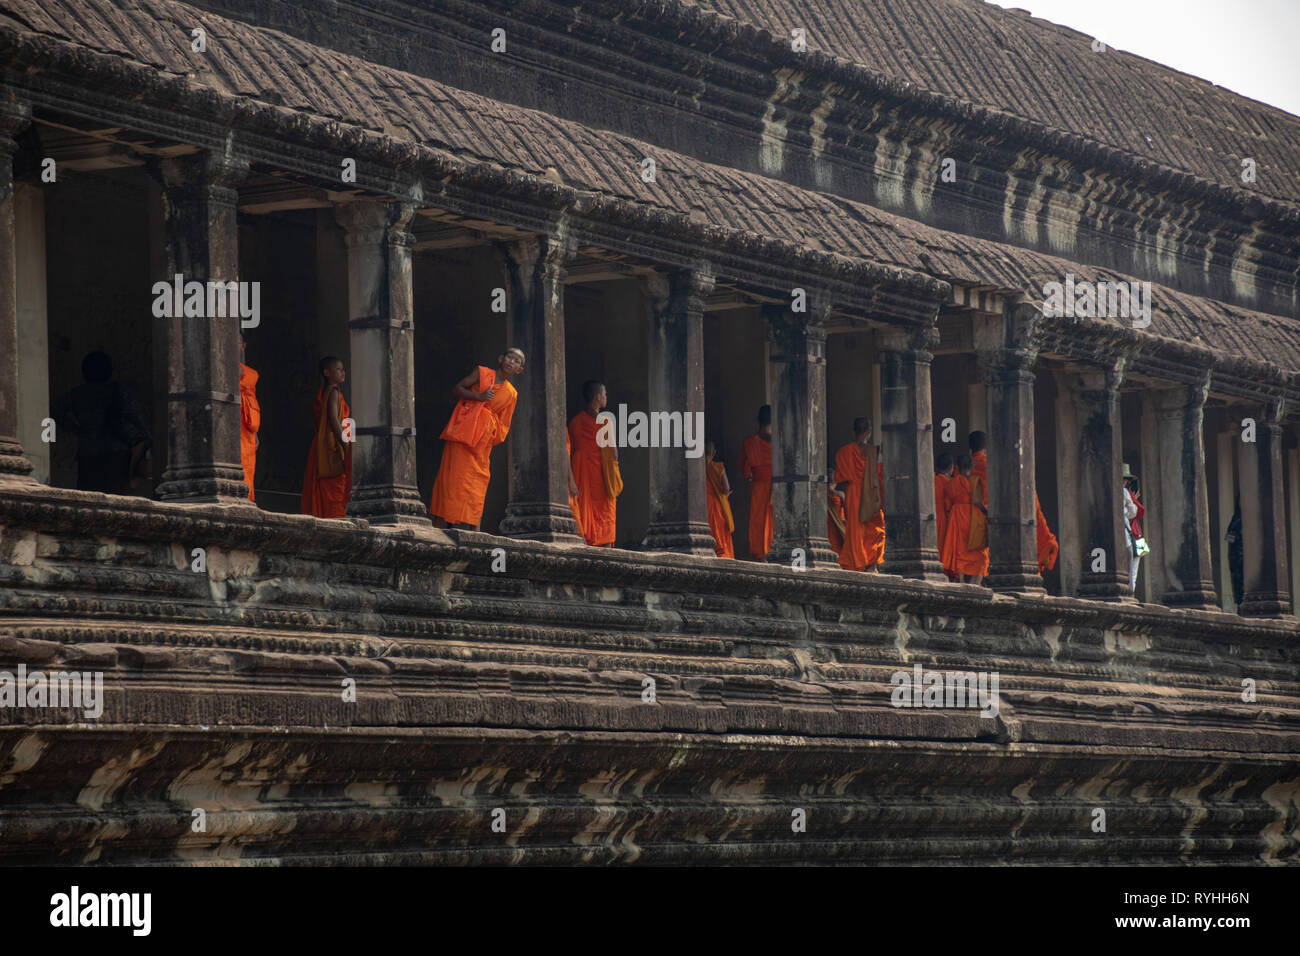 Angkor wat ,Siem Reap, Cambodia, Thursday 14th March 2019. Siem reap , Cambodia weather: The hot dry spell continues with highs of 36 degrees and lows of 26 degrees. Tourists visiting the temples of the Angkor wat in early morning to avoid the extreme heat later in the day. Angkor Wat is a temple complex in Cambodia and one of the largest religious monuments in the world, on a site measuring 162.6 hectares. Credit: WansfordPhoto/Alamy Live News Stock Photo